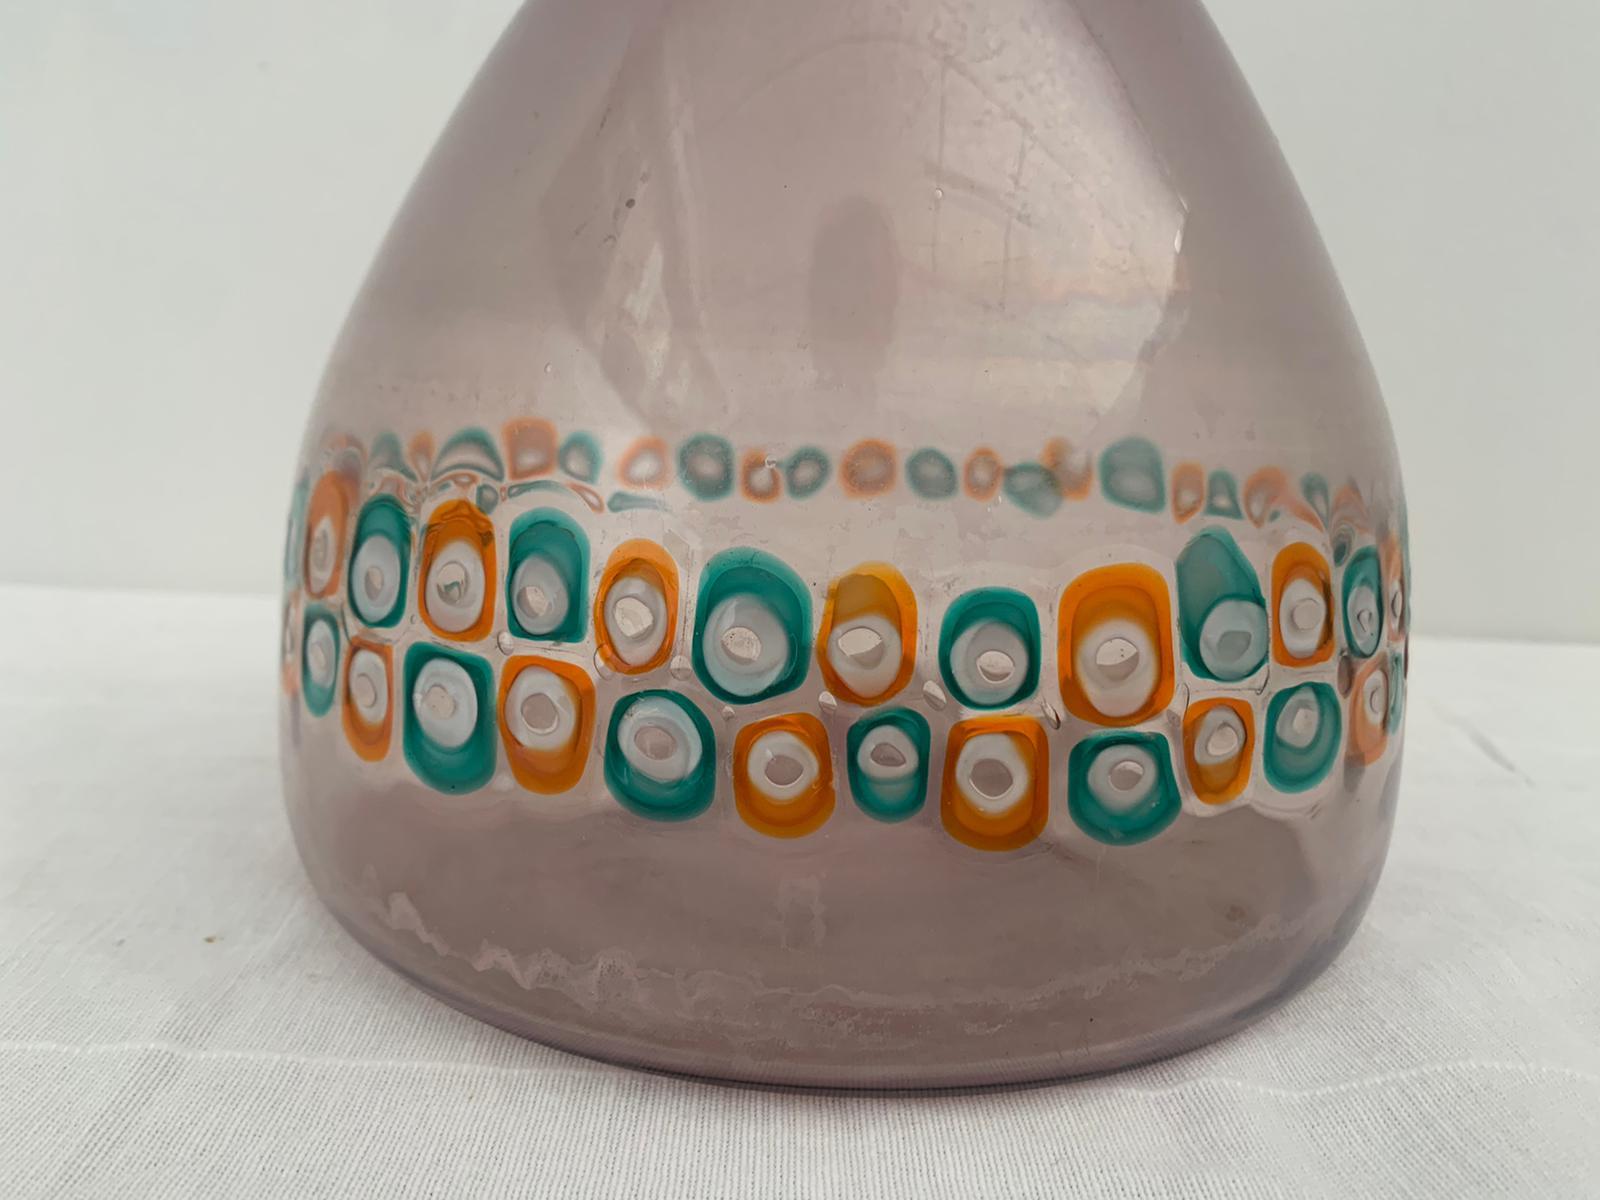 Aubergine Truncated Cone Vase by Murrine from Vistosi In Excellent Condition For Sale In Montelabbate, PU